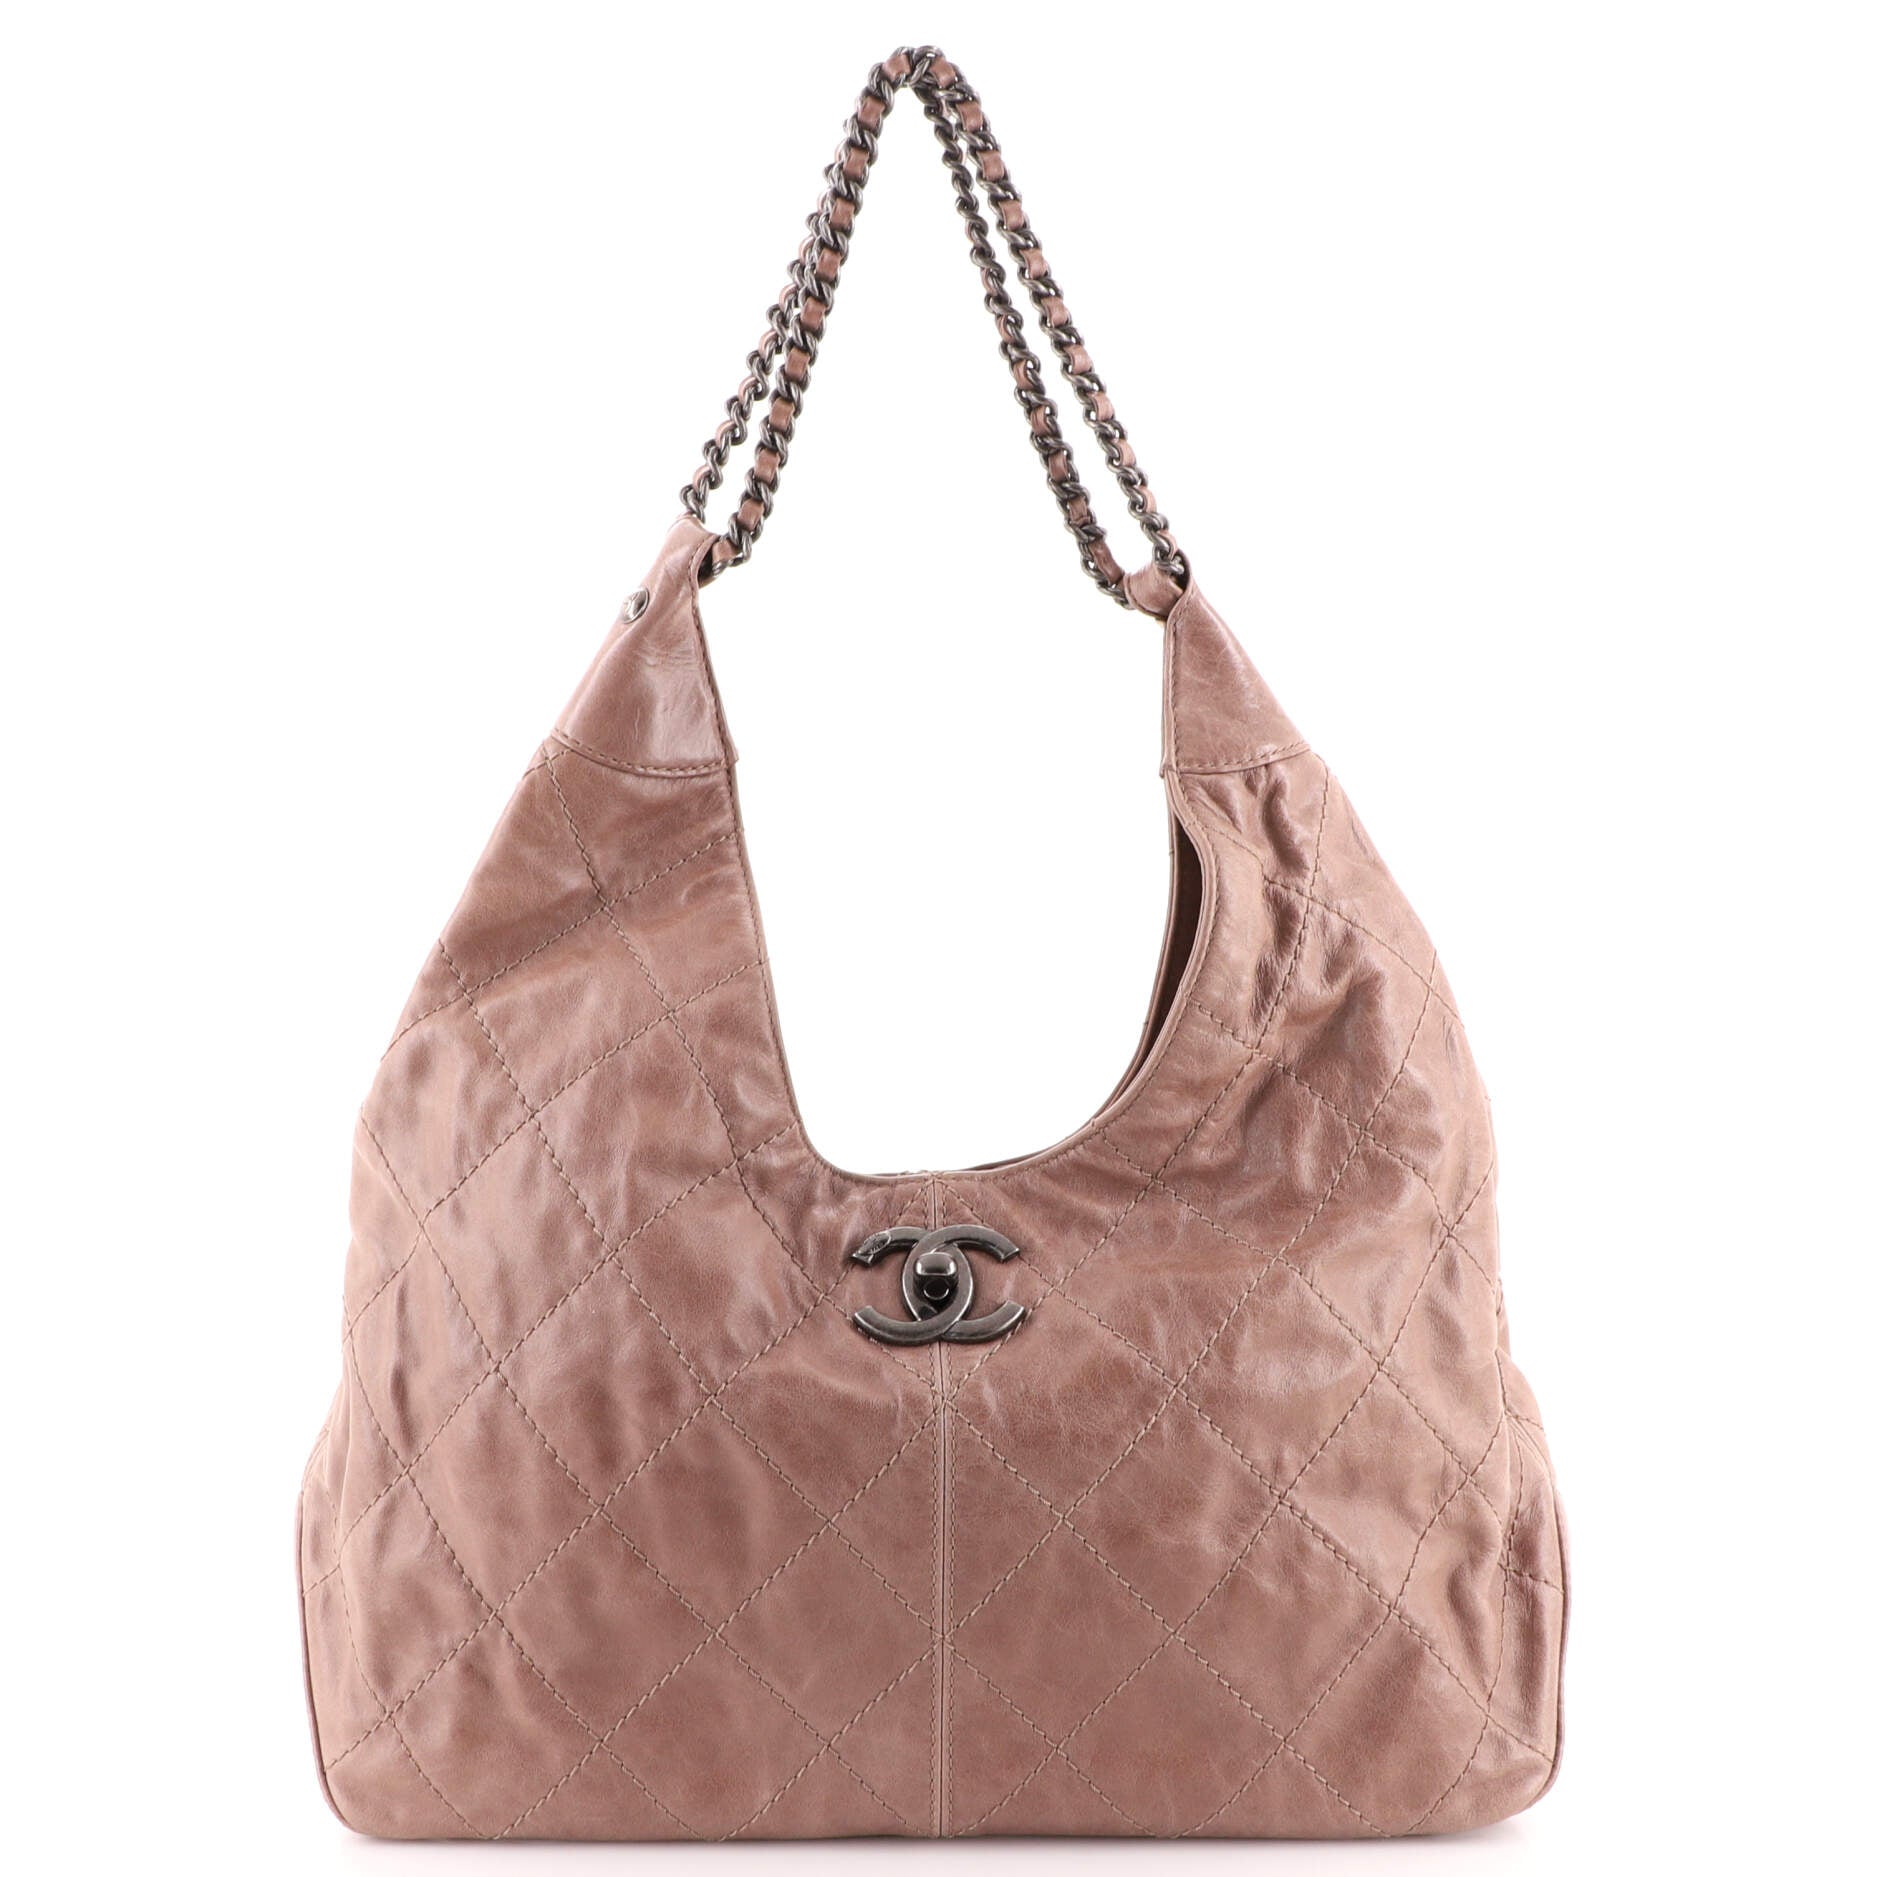 Chanel Quilted Iridescent Aged Calfskin Hobo